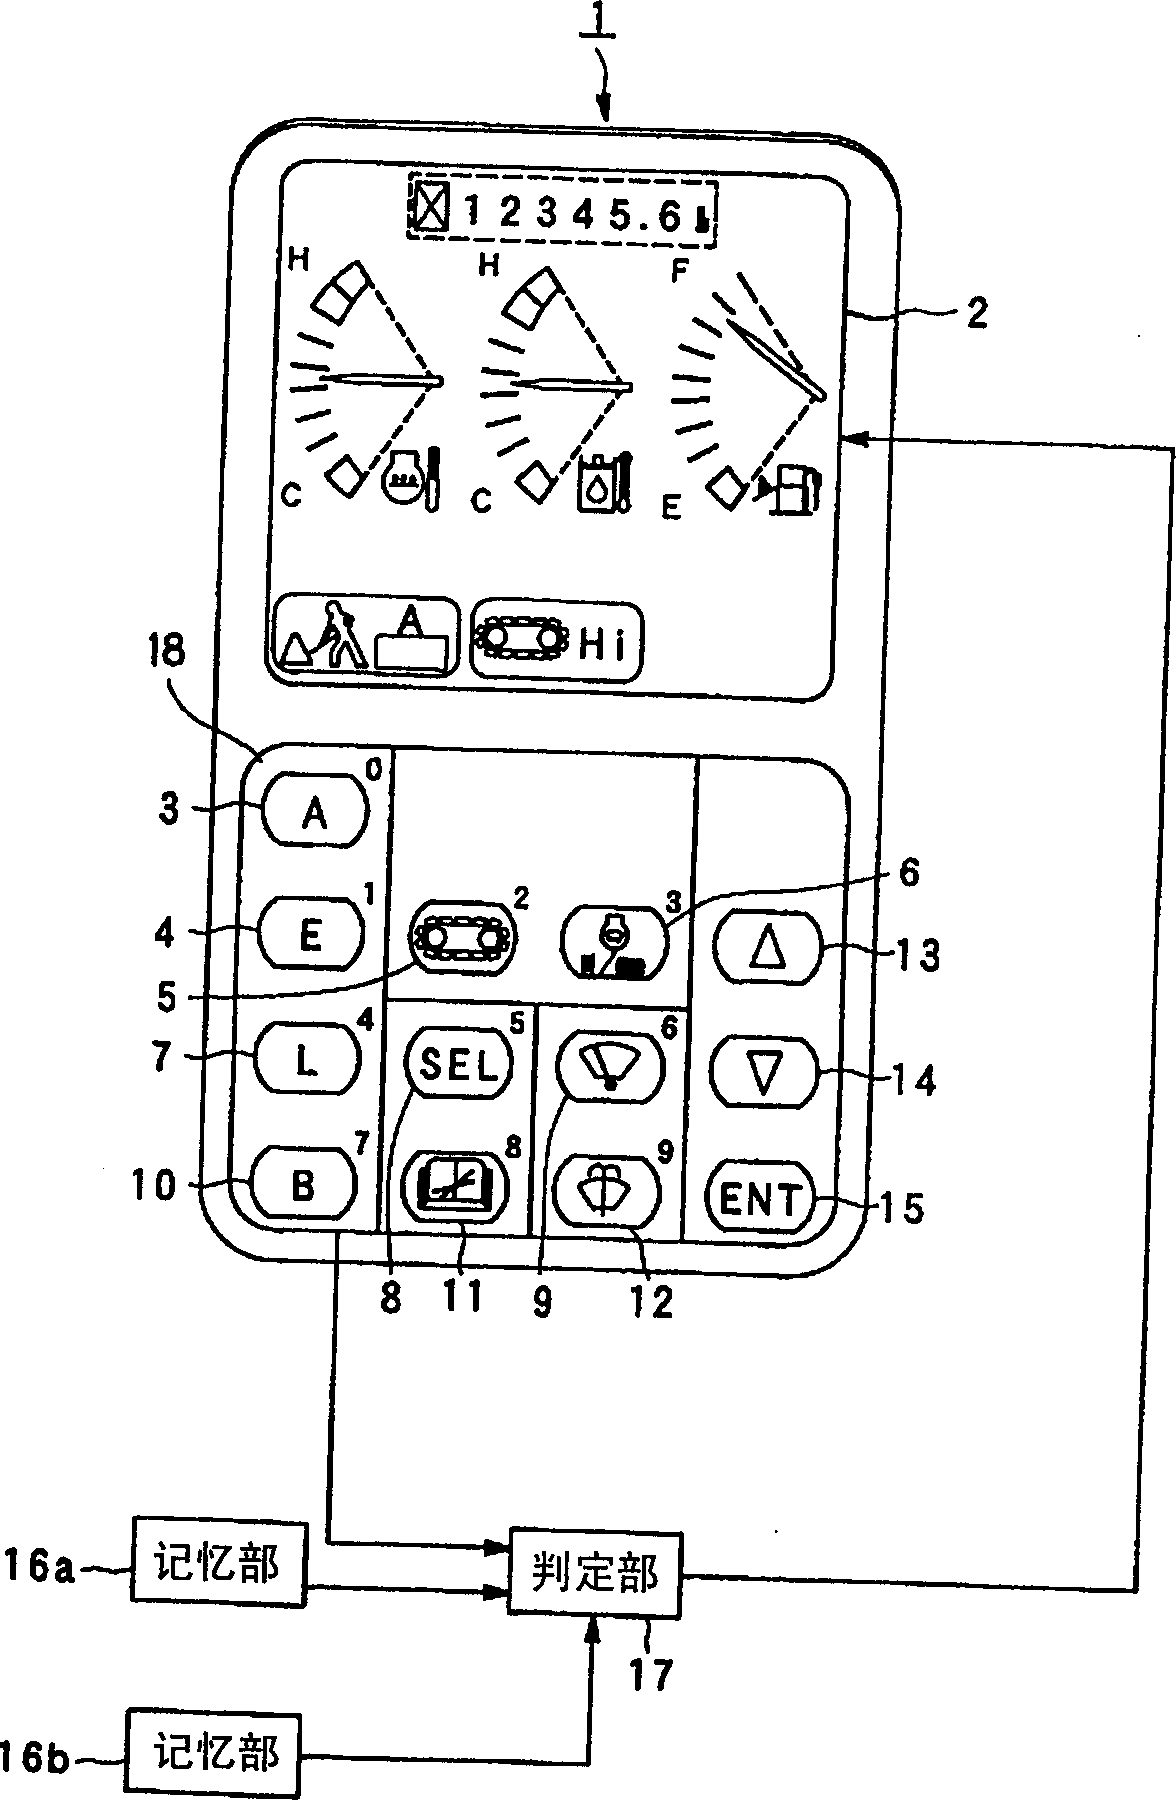 Display device and function locking and releasing device for building machinery